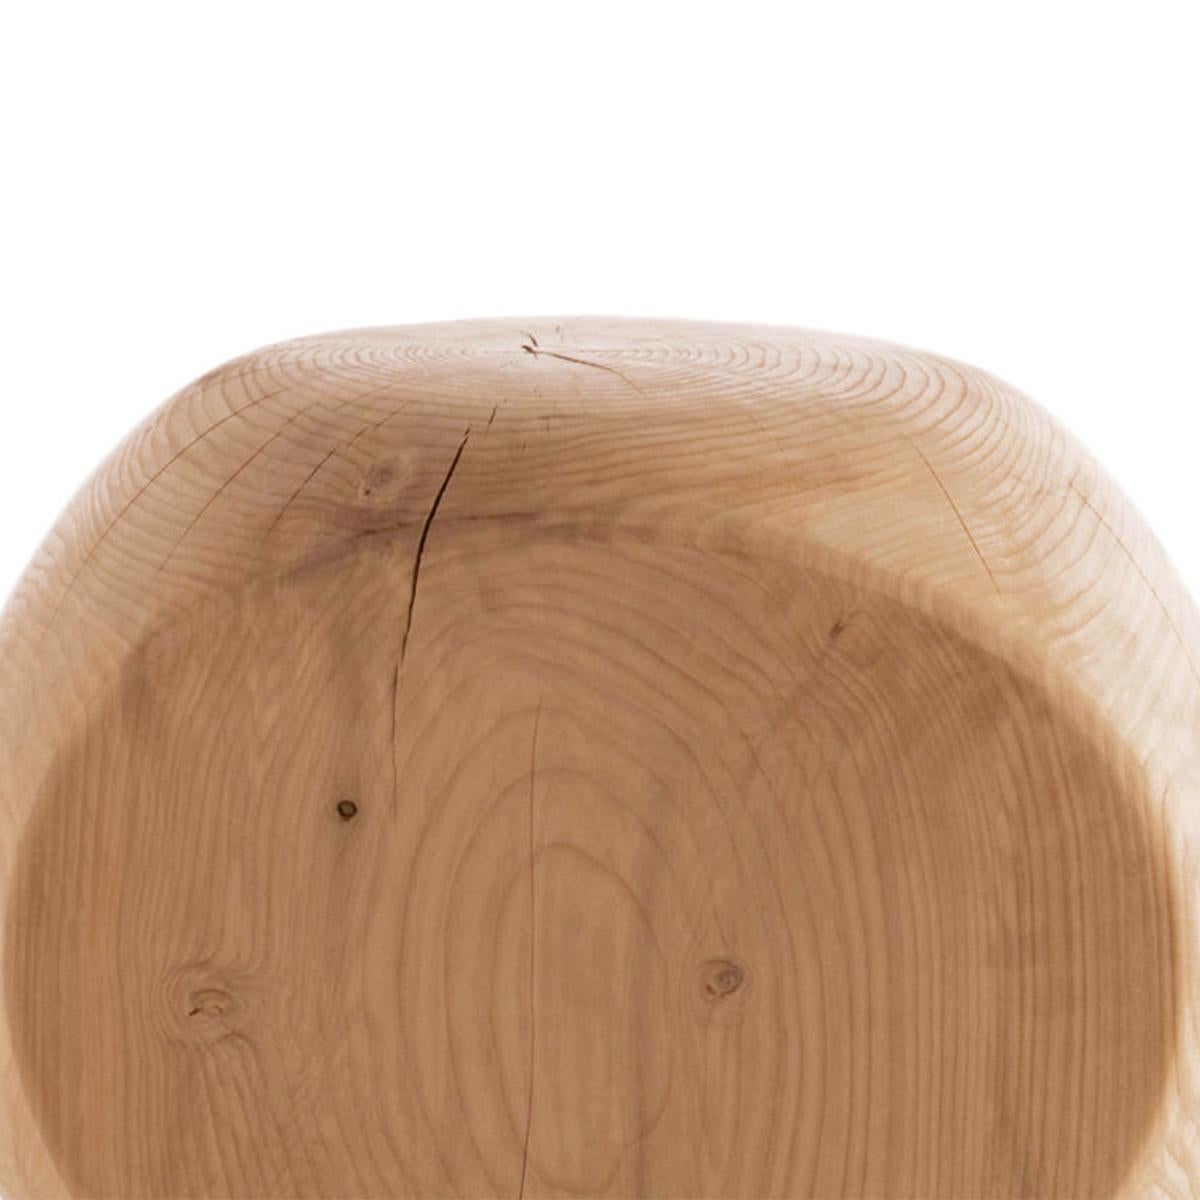 Stool cocoona shape 3 in solid natural aromatic
cedar wood. Made in one block of cedar wood.
Treated with natural pine extracts.
Can be used in the 3 faces of the stool.
Solid cedar wood include movement, 
cracks and changes in wood conditions,